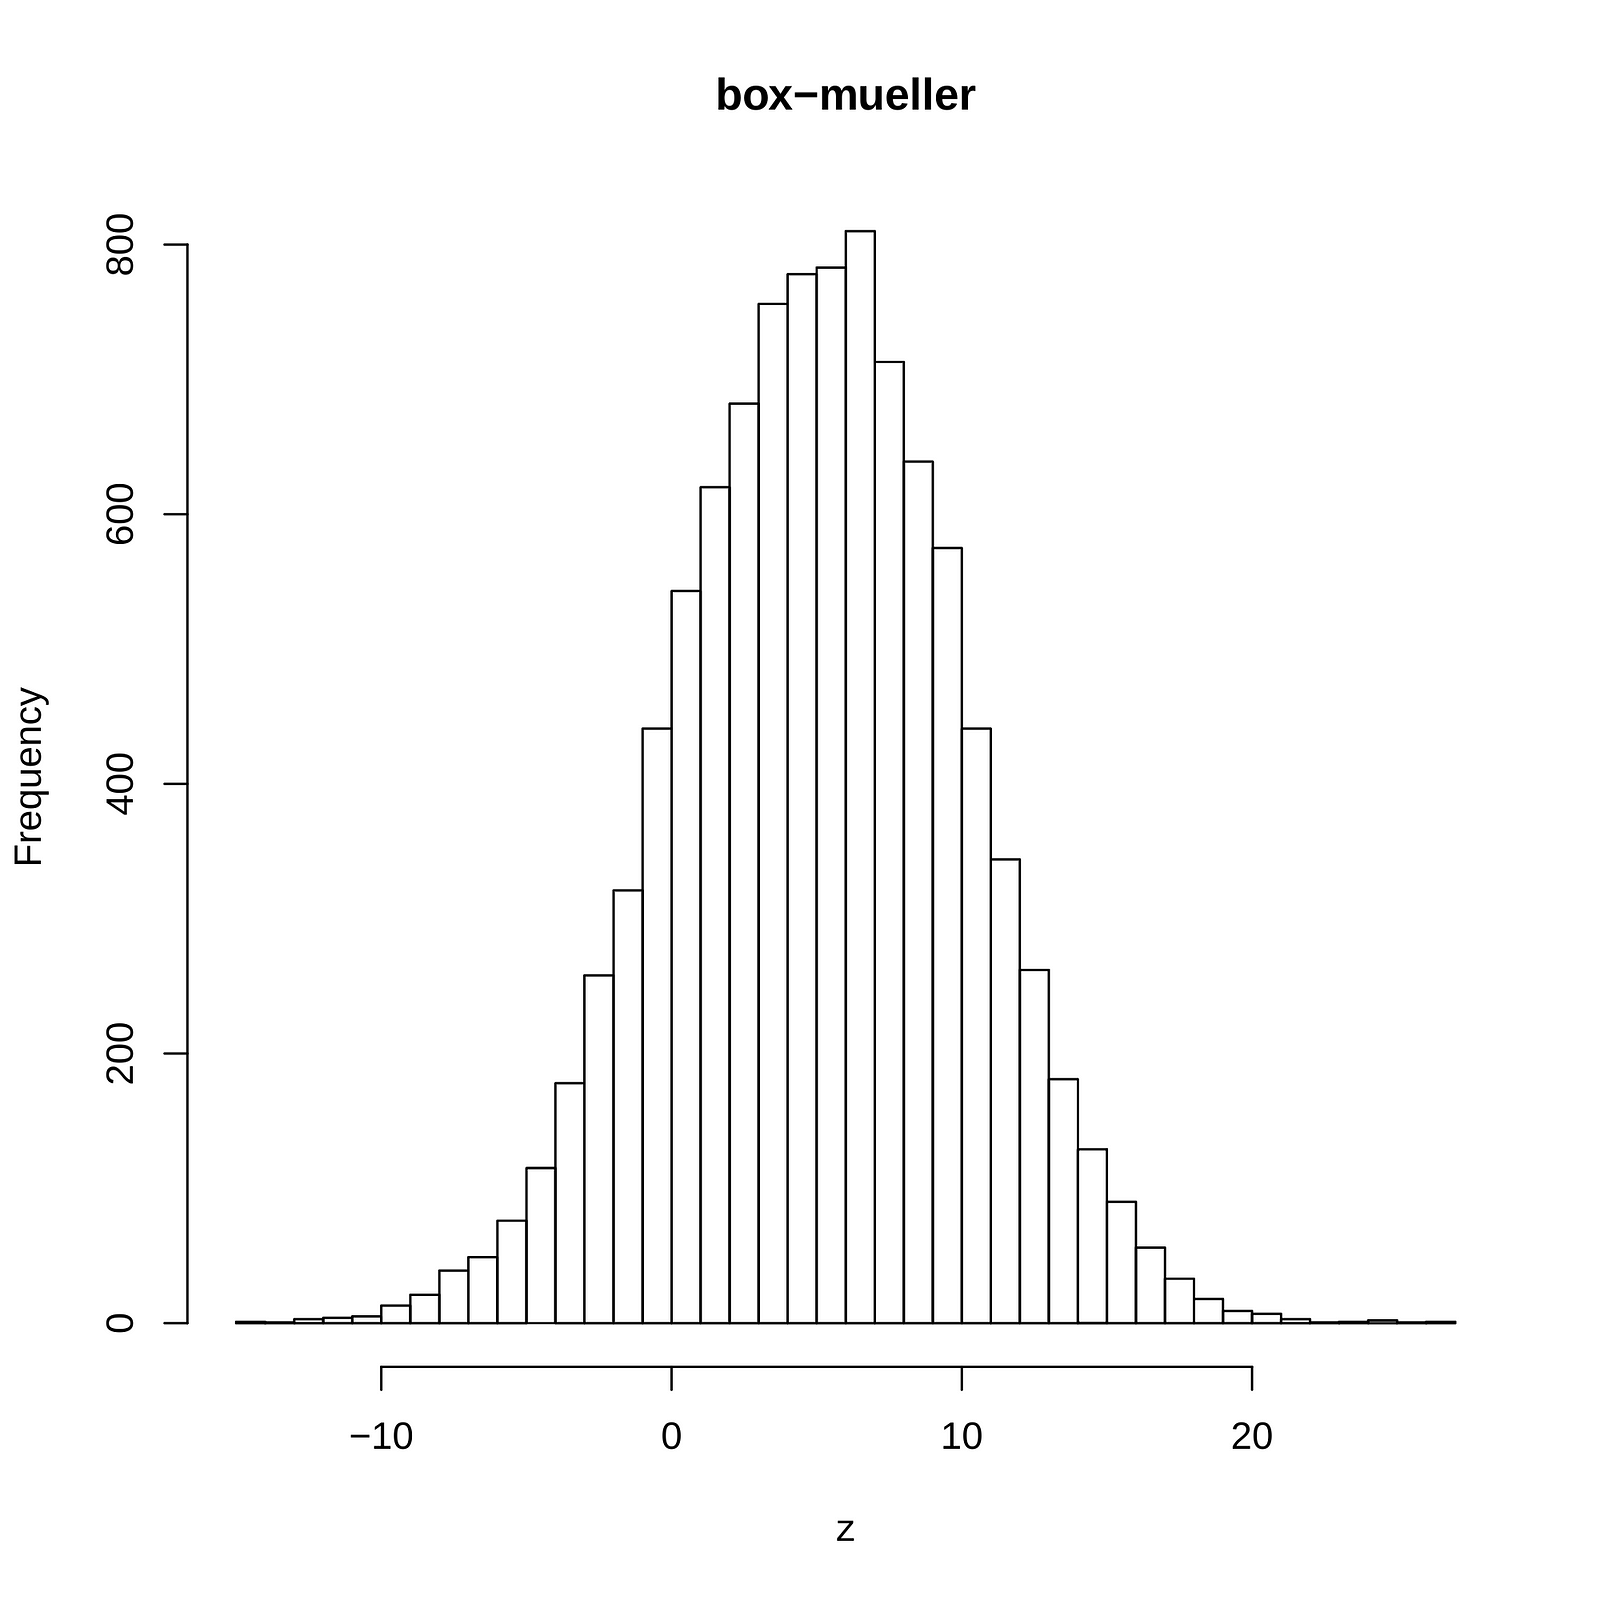 monte-carlo-simulation-in-r-with-focus-on-financial-data